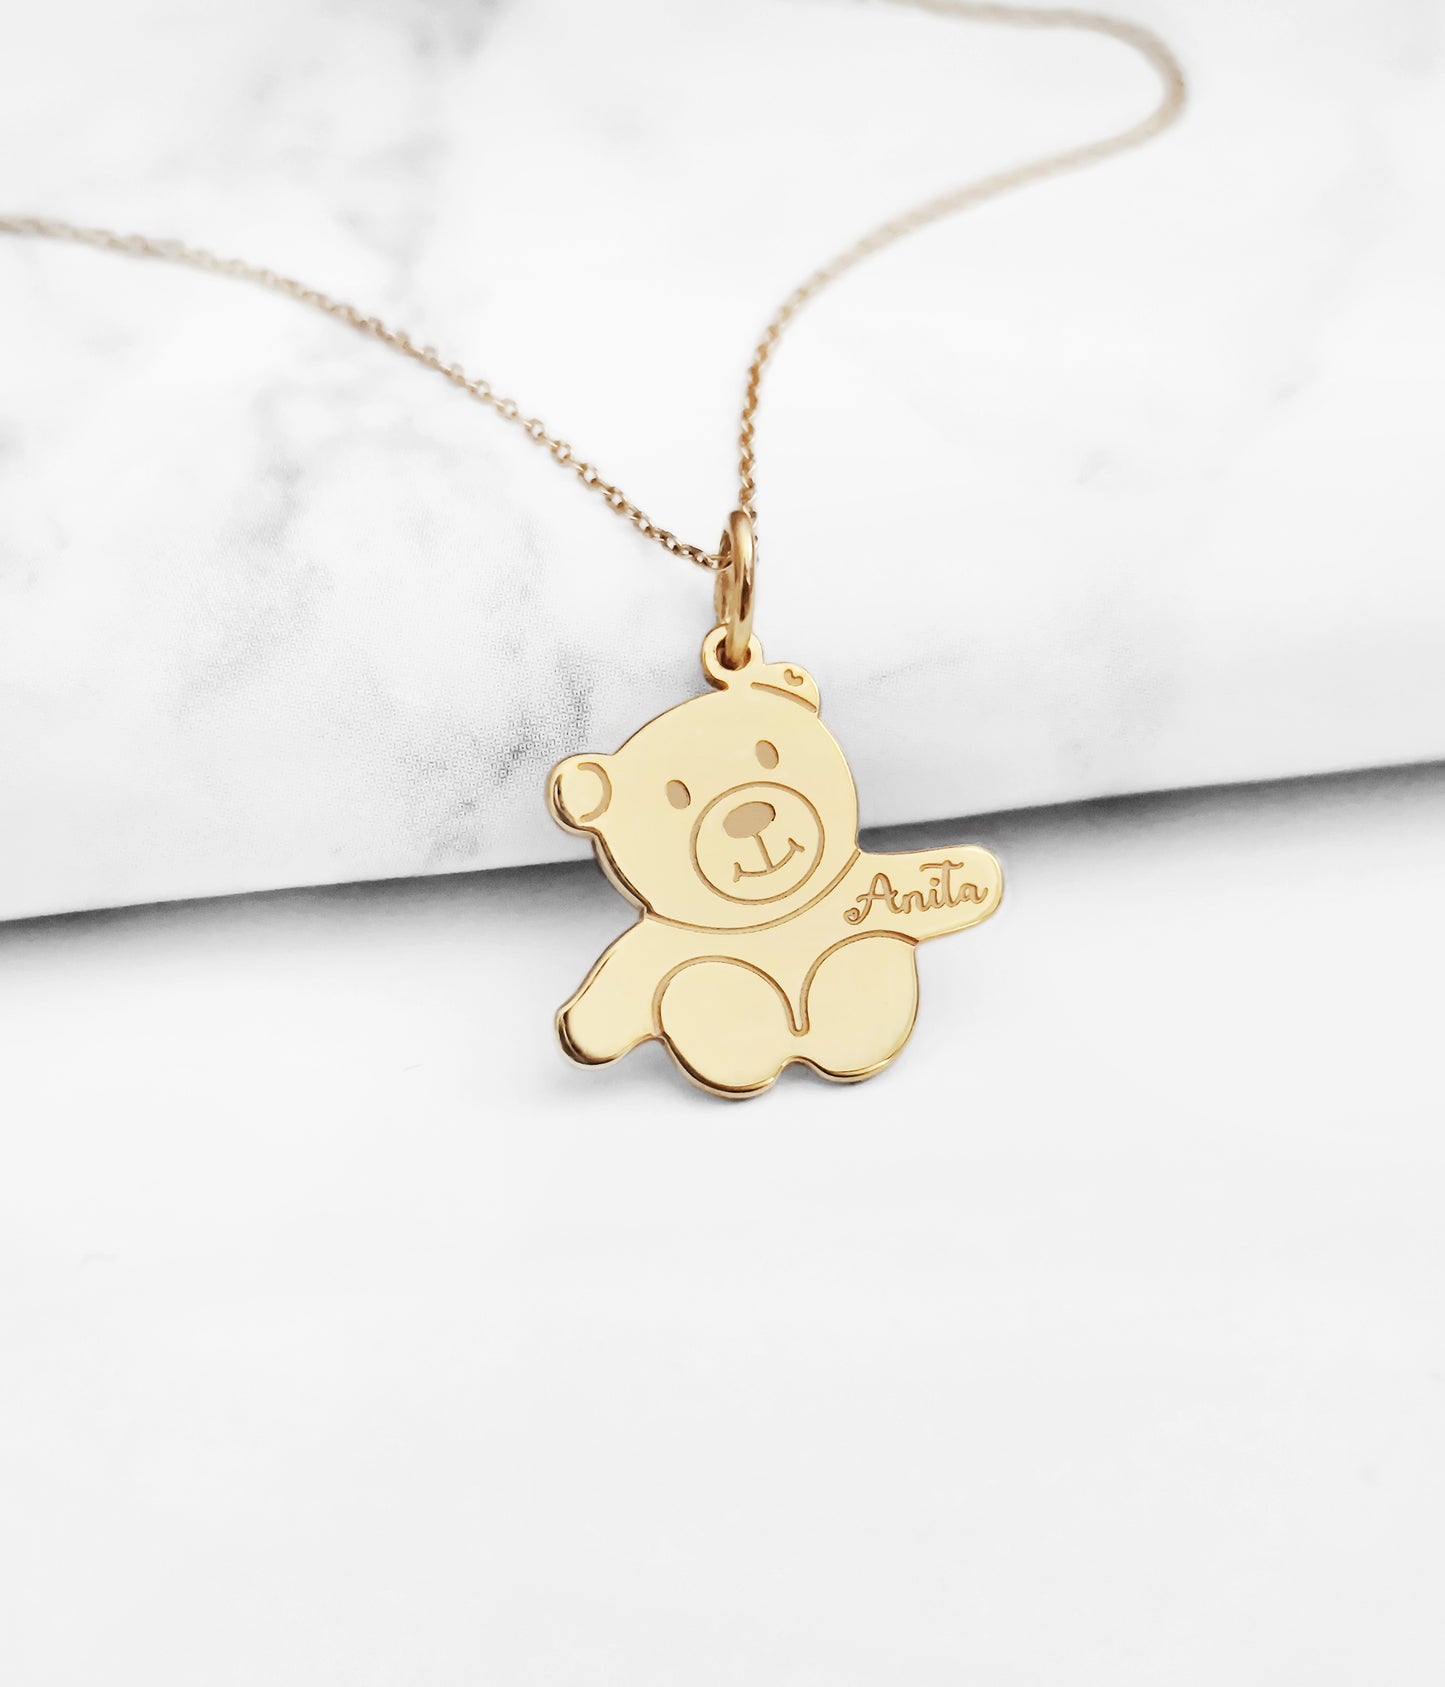 14K 9K Solid Gold Personalized Name Teddy Bear Pendant Charm Necklace